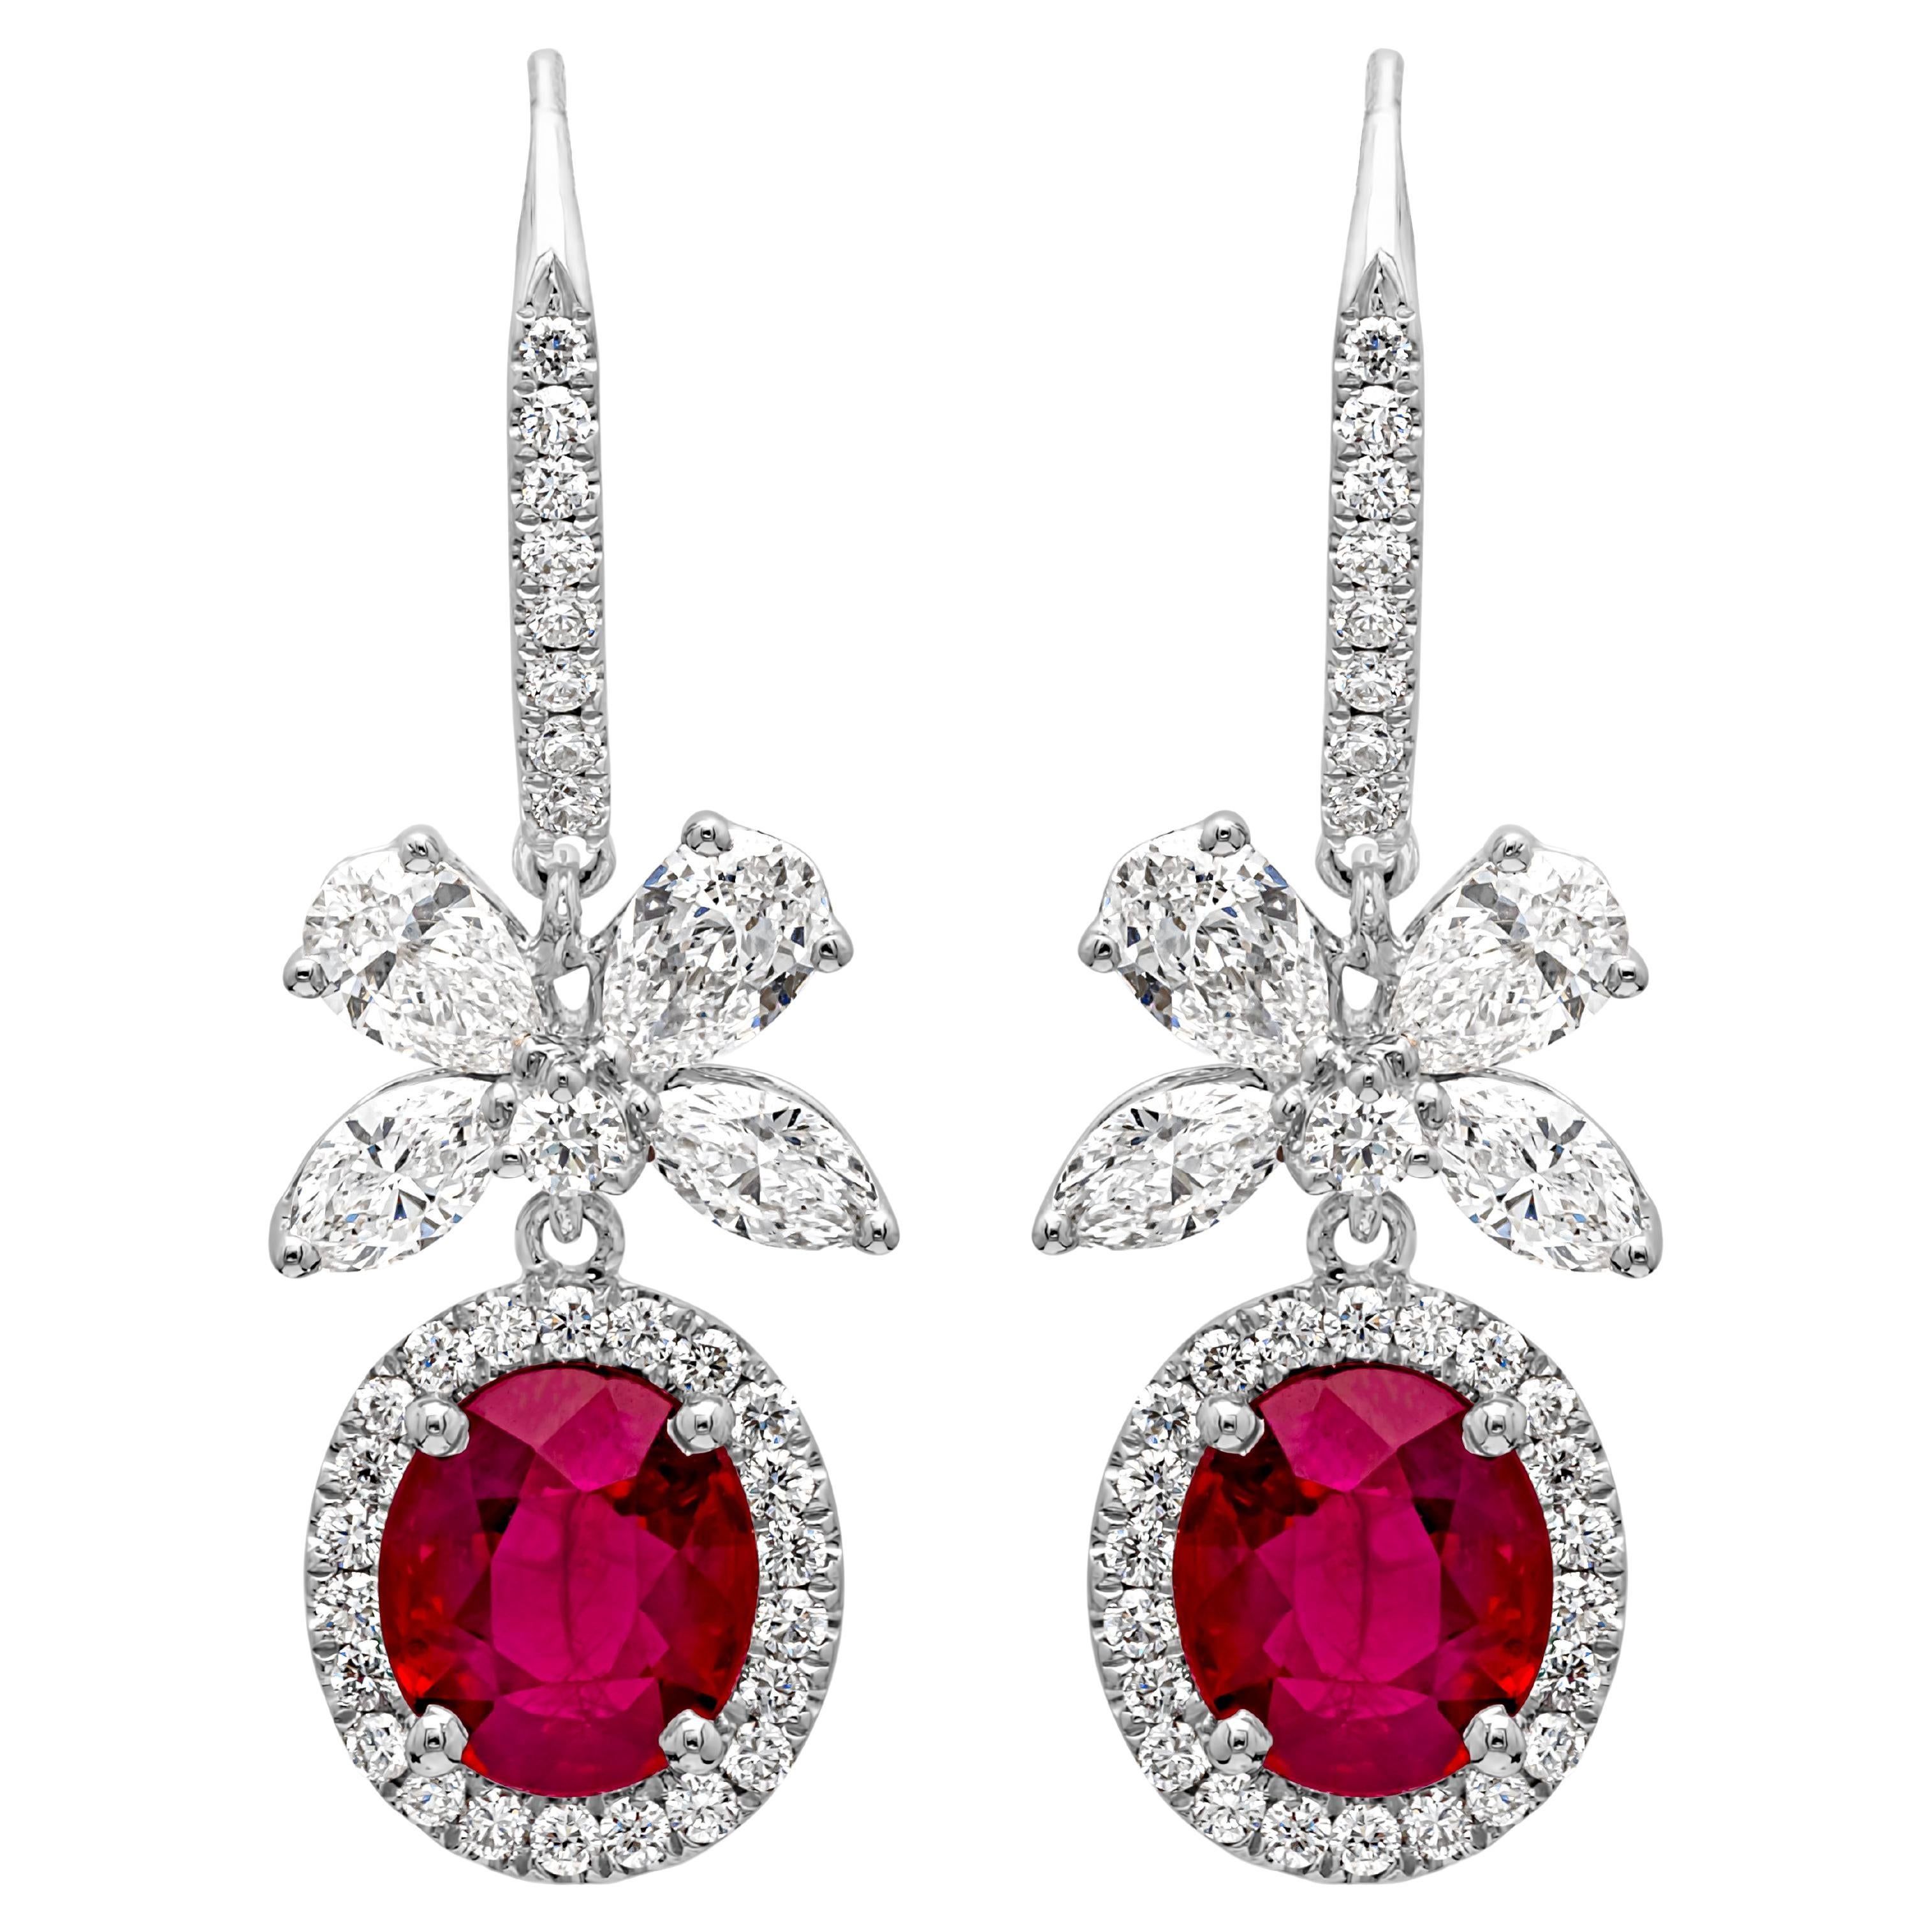 2.56 Carats Total Oval Cut Ruby and Mixed Cut Diamond Dangle Earrings For Sale